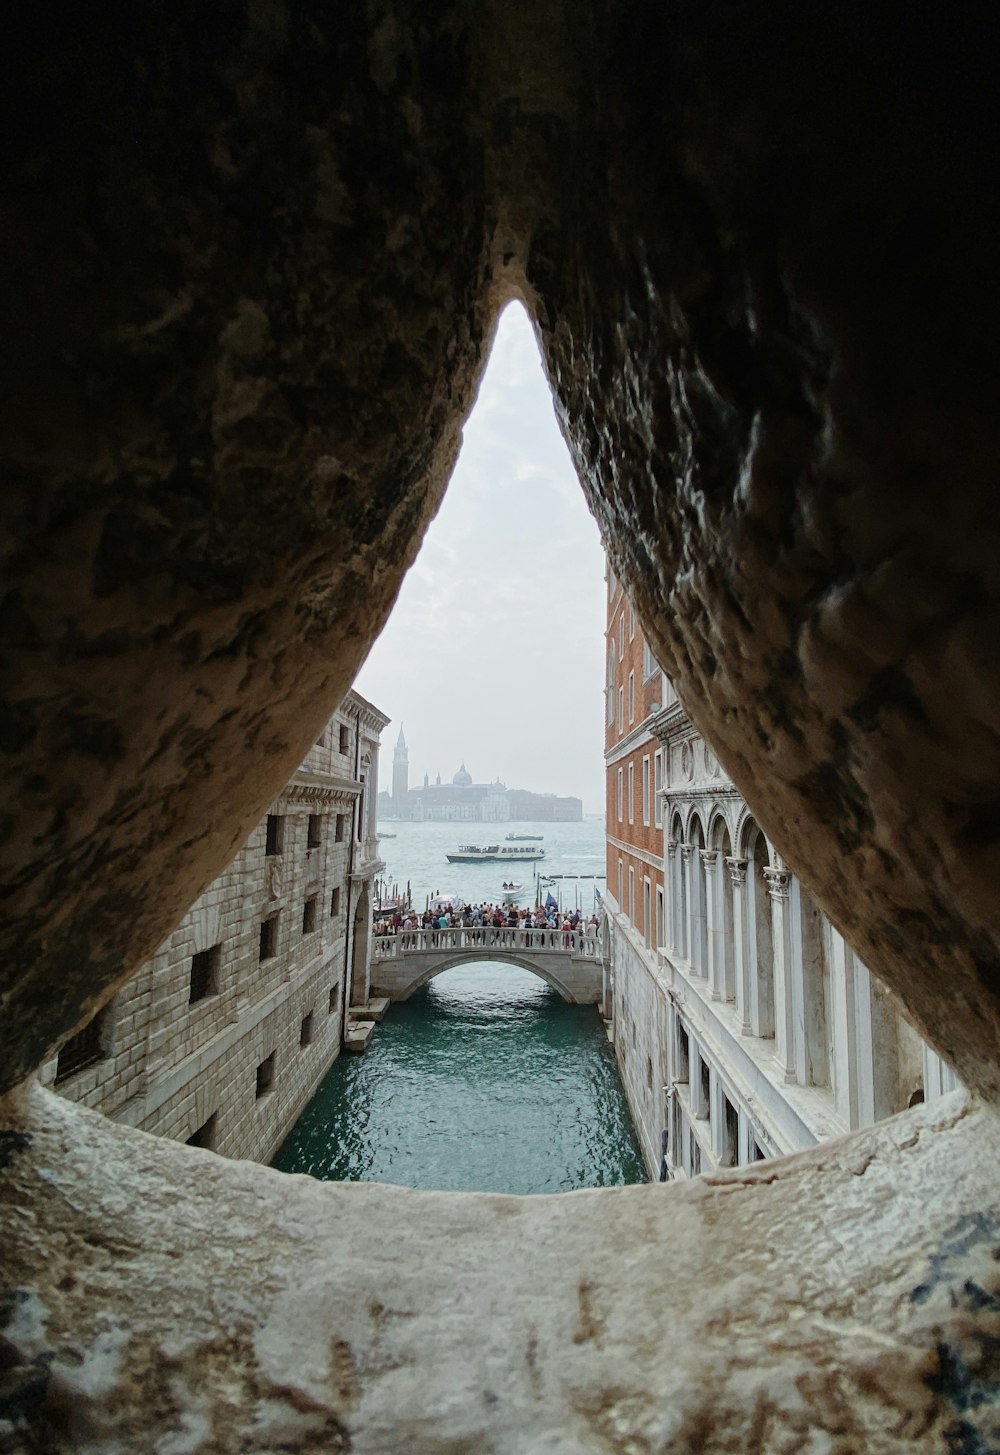 a view of a canal from inside a tunnel